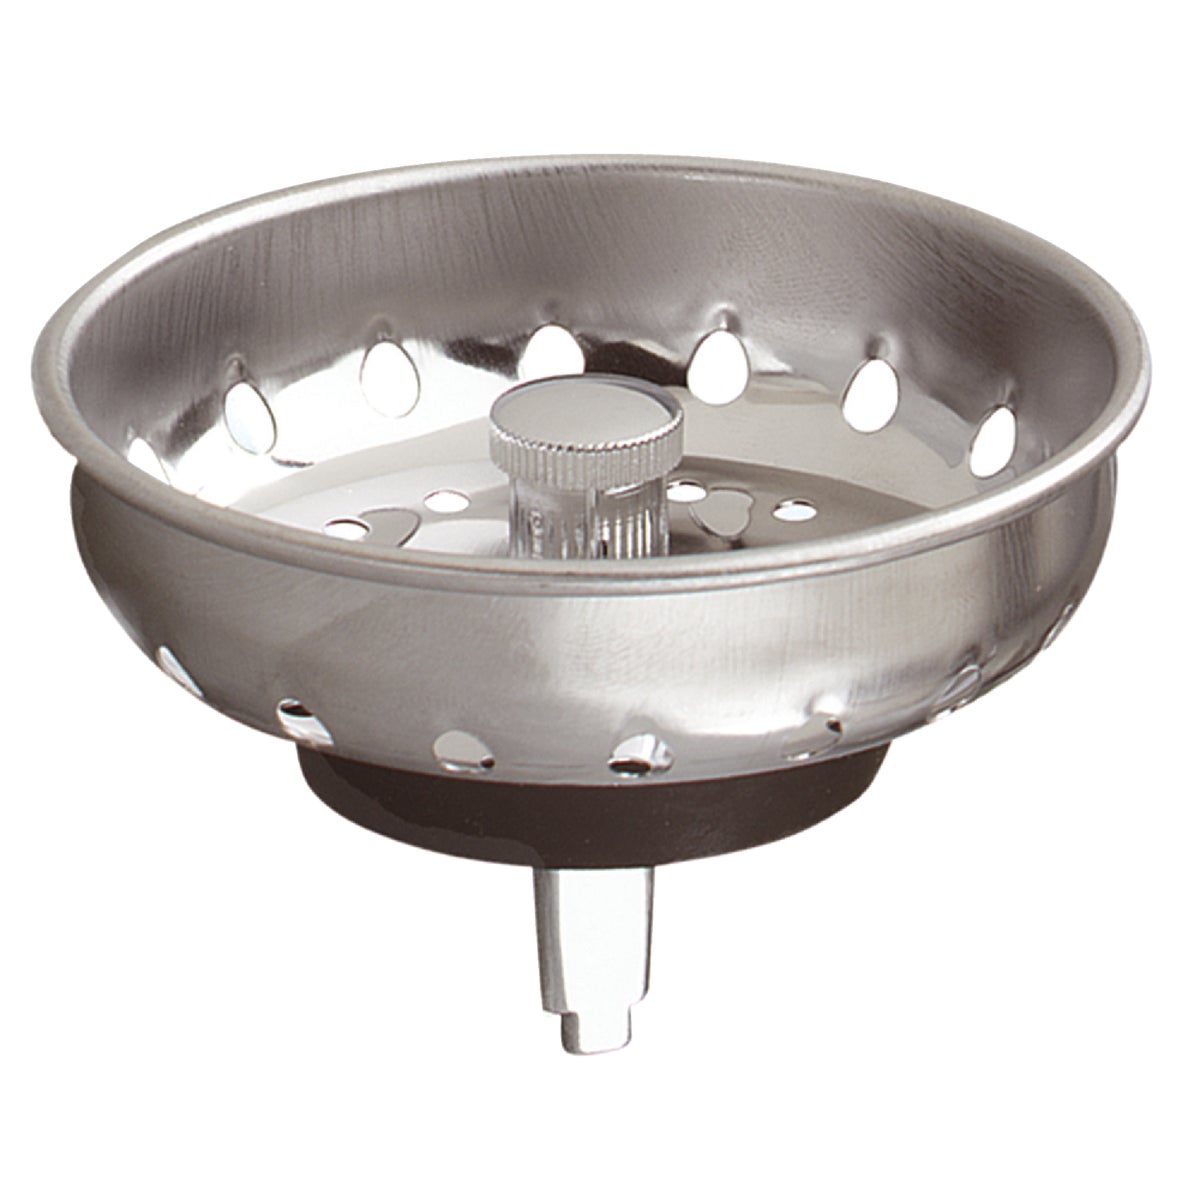 Item 457086, Stainless steel replacement basket, universal fit for 3-1/2" strainer 